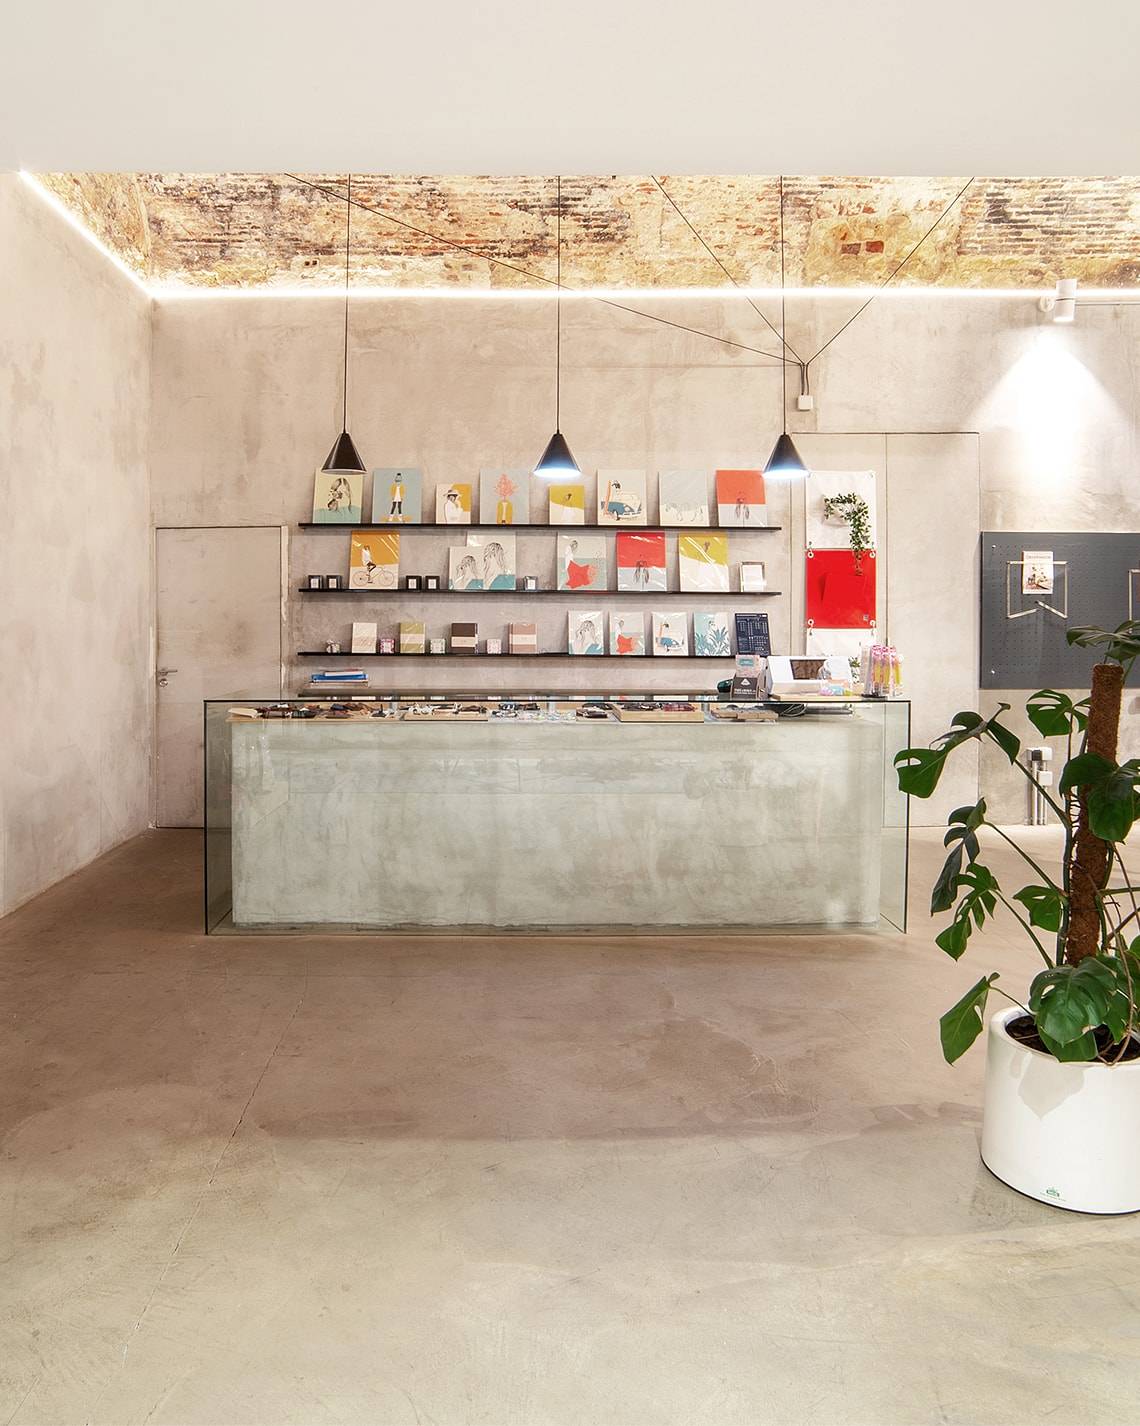 View of the interior at The Feeting Room concept store in Chiado Lisboa